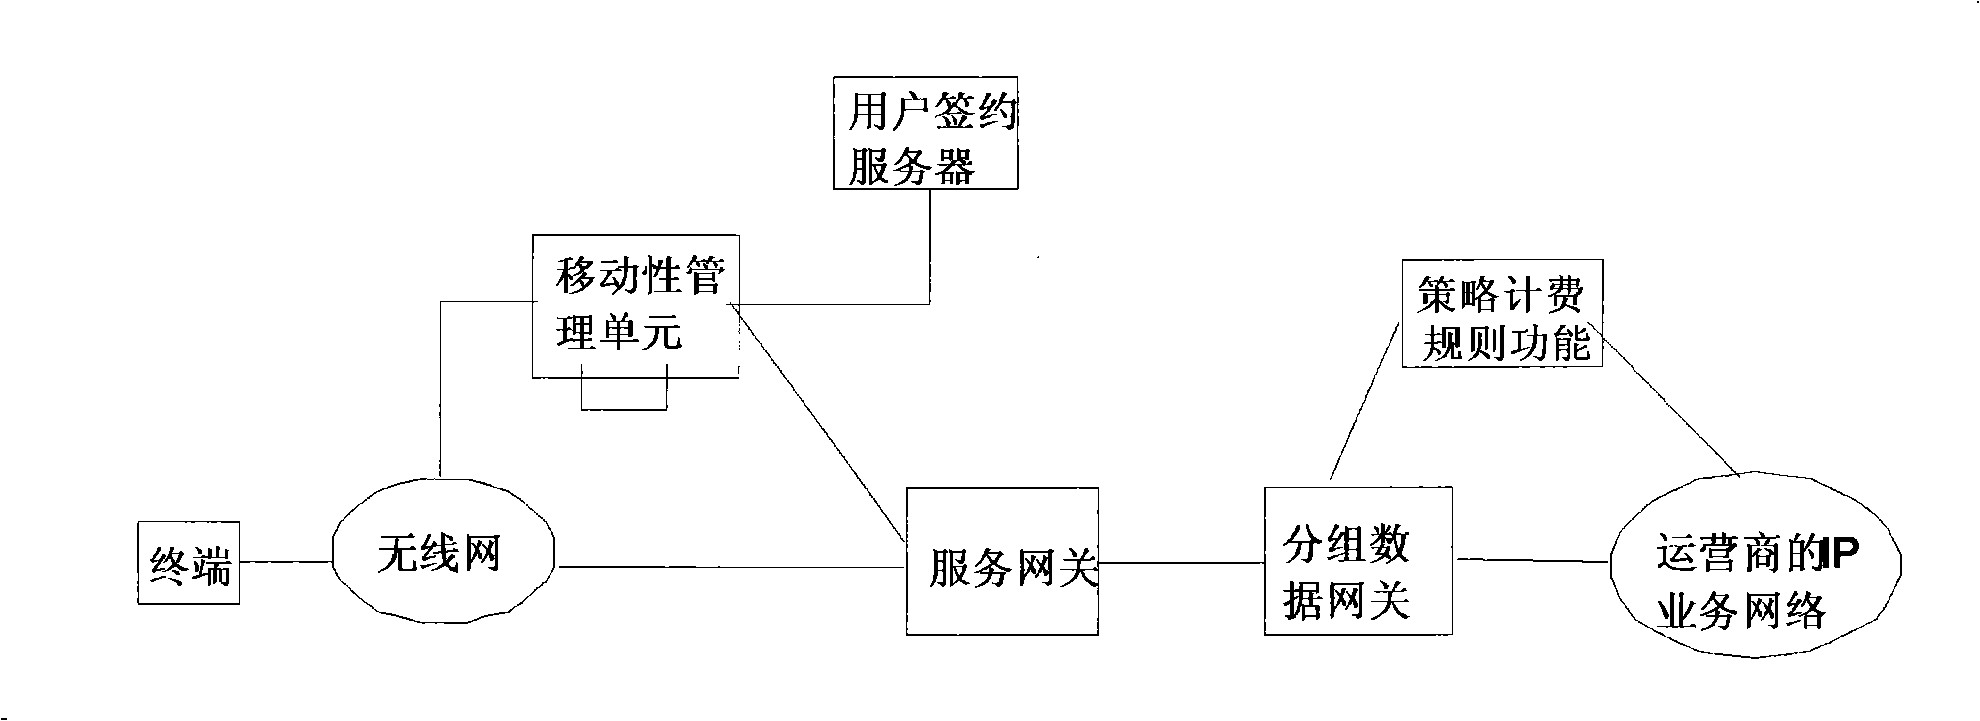 Method for configuring and displaying name of household base station, and name of internal customer group